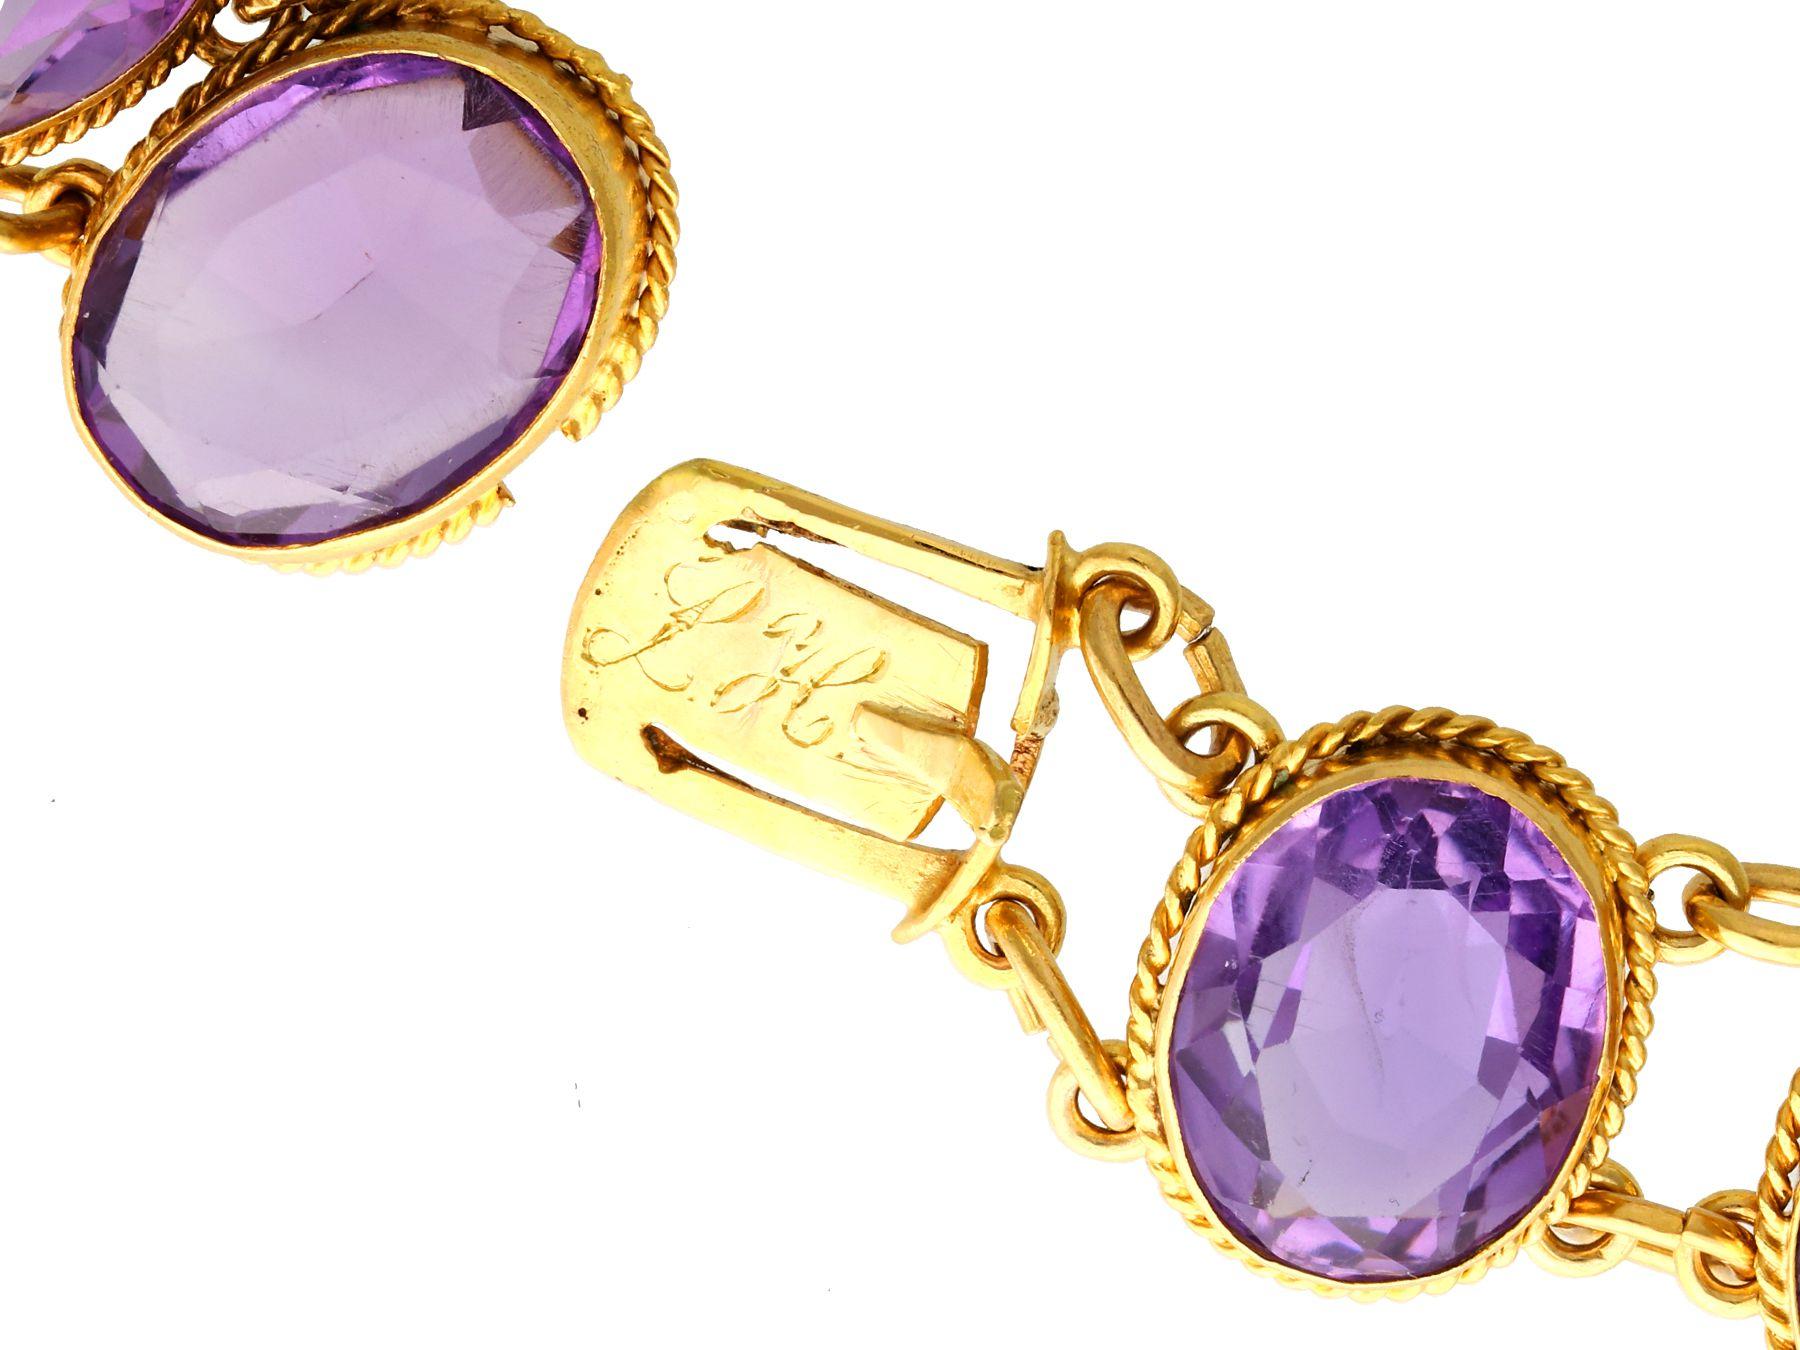 Women's or Men's Antique Victorian 274.91 Carat Amethyst and Yellow Gold Rivière Necklace For Sale